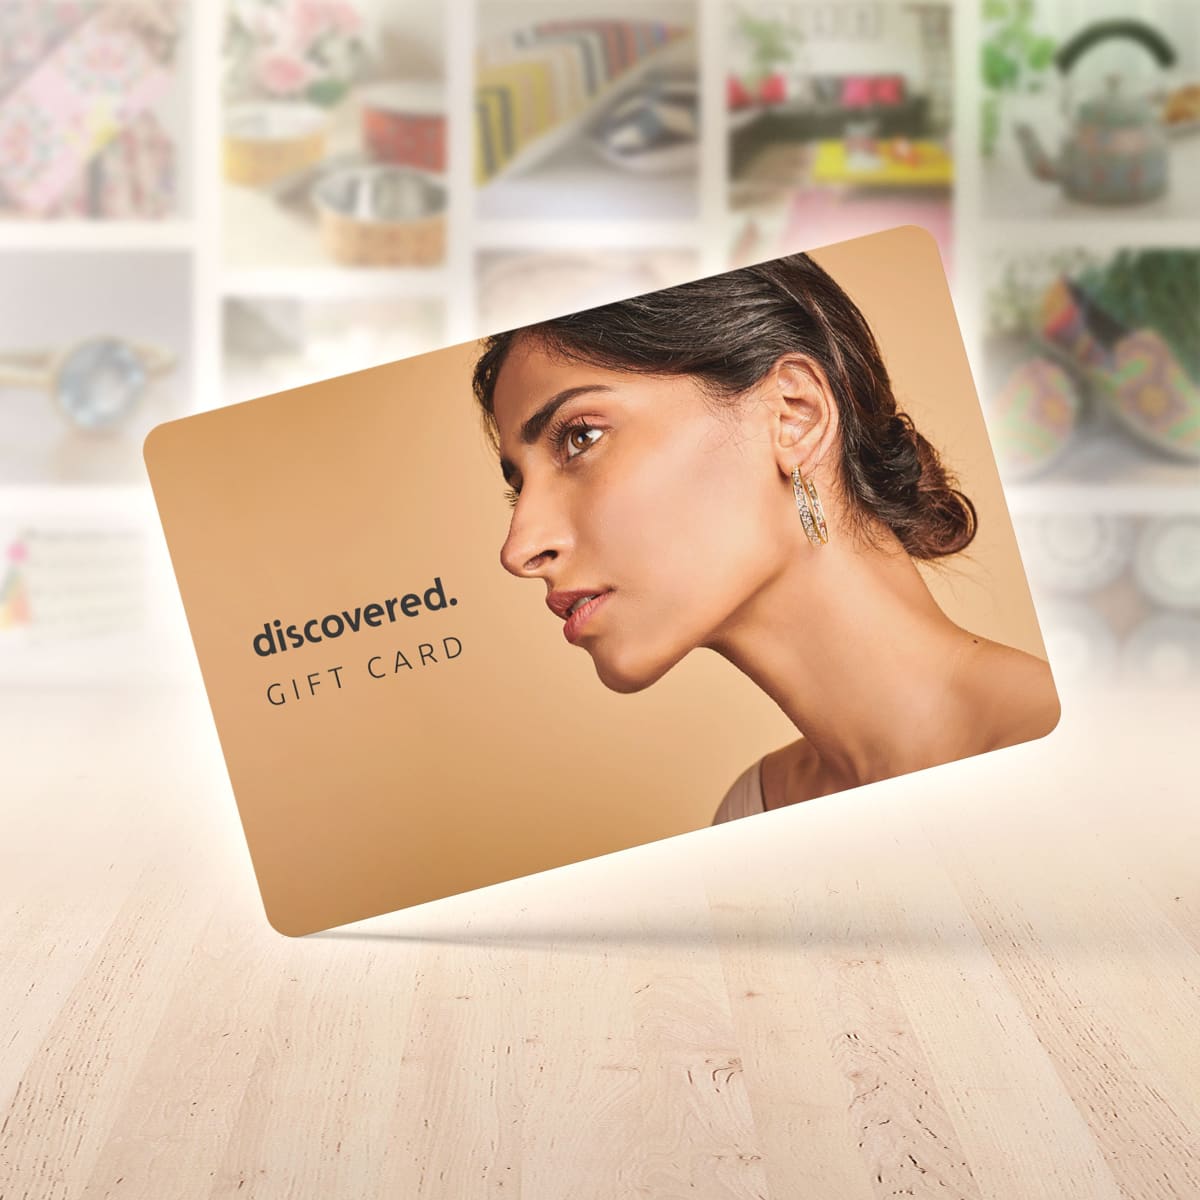 Why digital gift cards are quickly replacing their plastic swipe cards